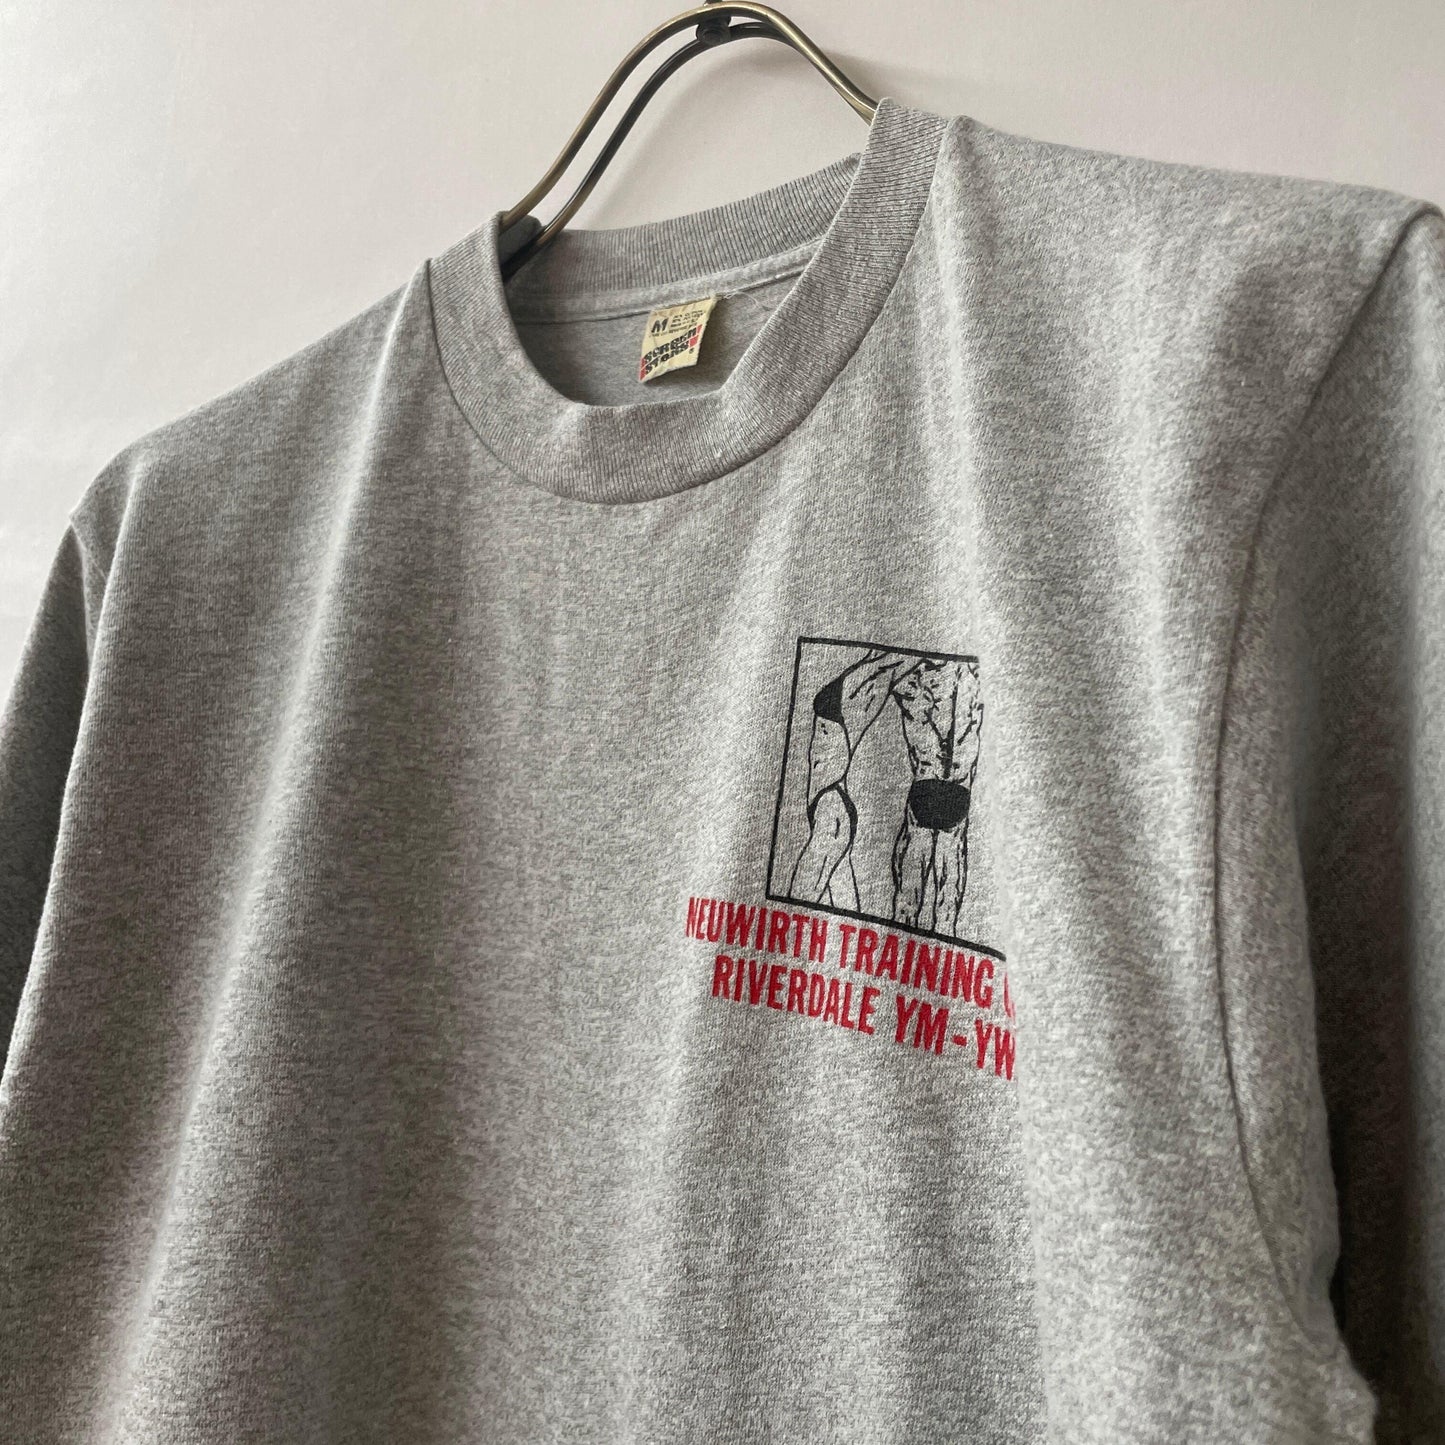 80-90s vintage Tee Tシャツ　ヴィンテージ　screen star シングルステッチ